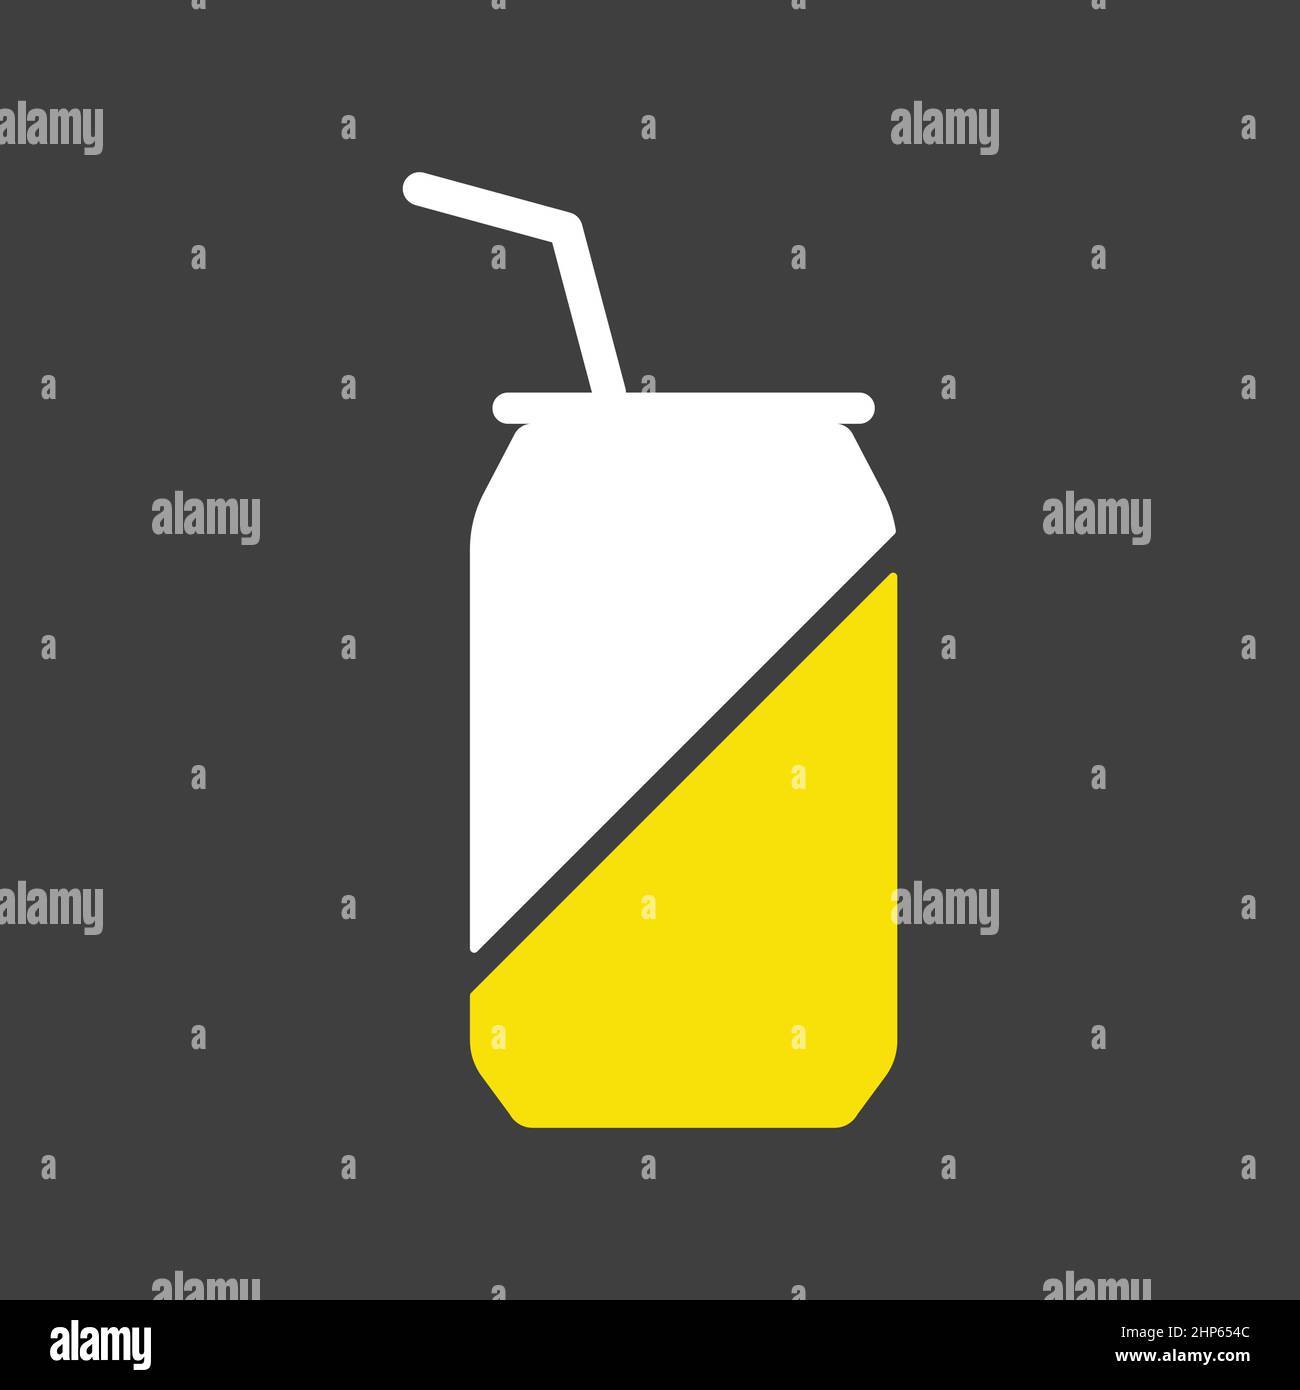 Soda cans vector icon on dark background. Fast food sign Stock Vector